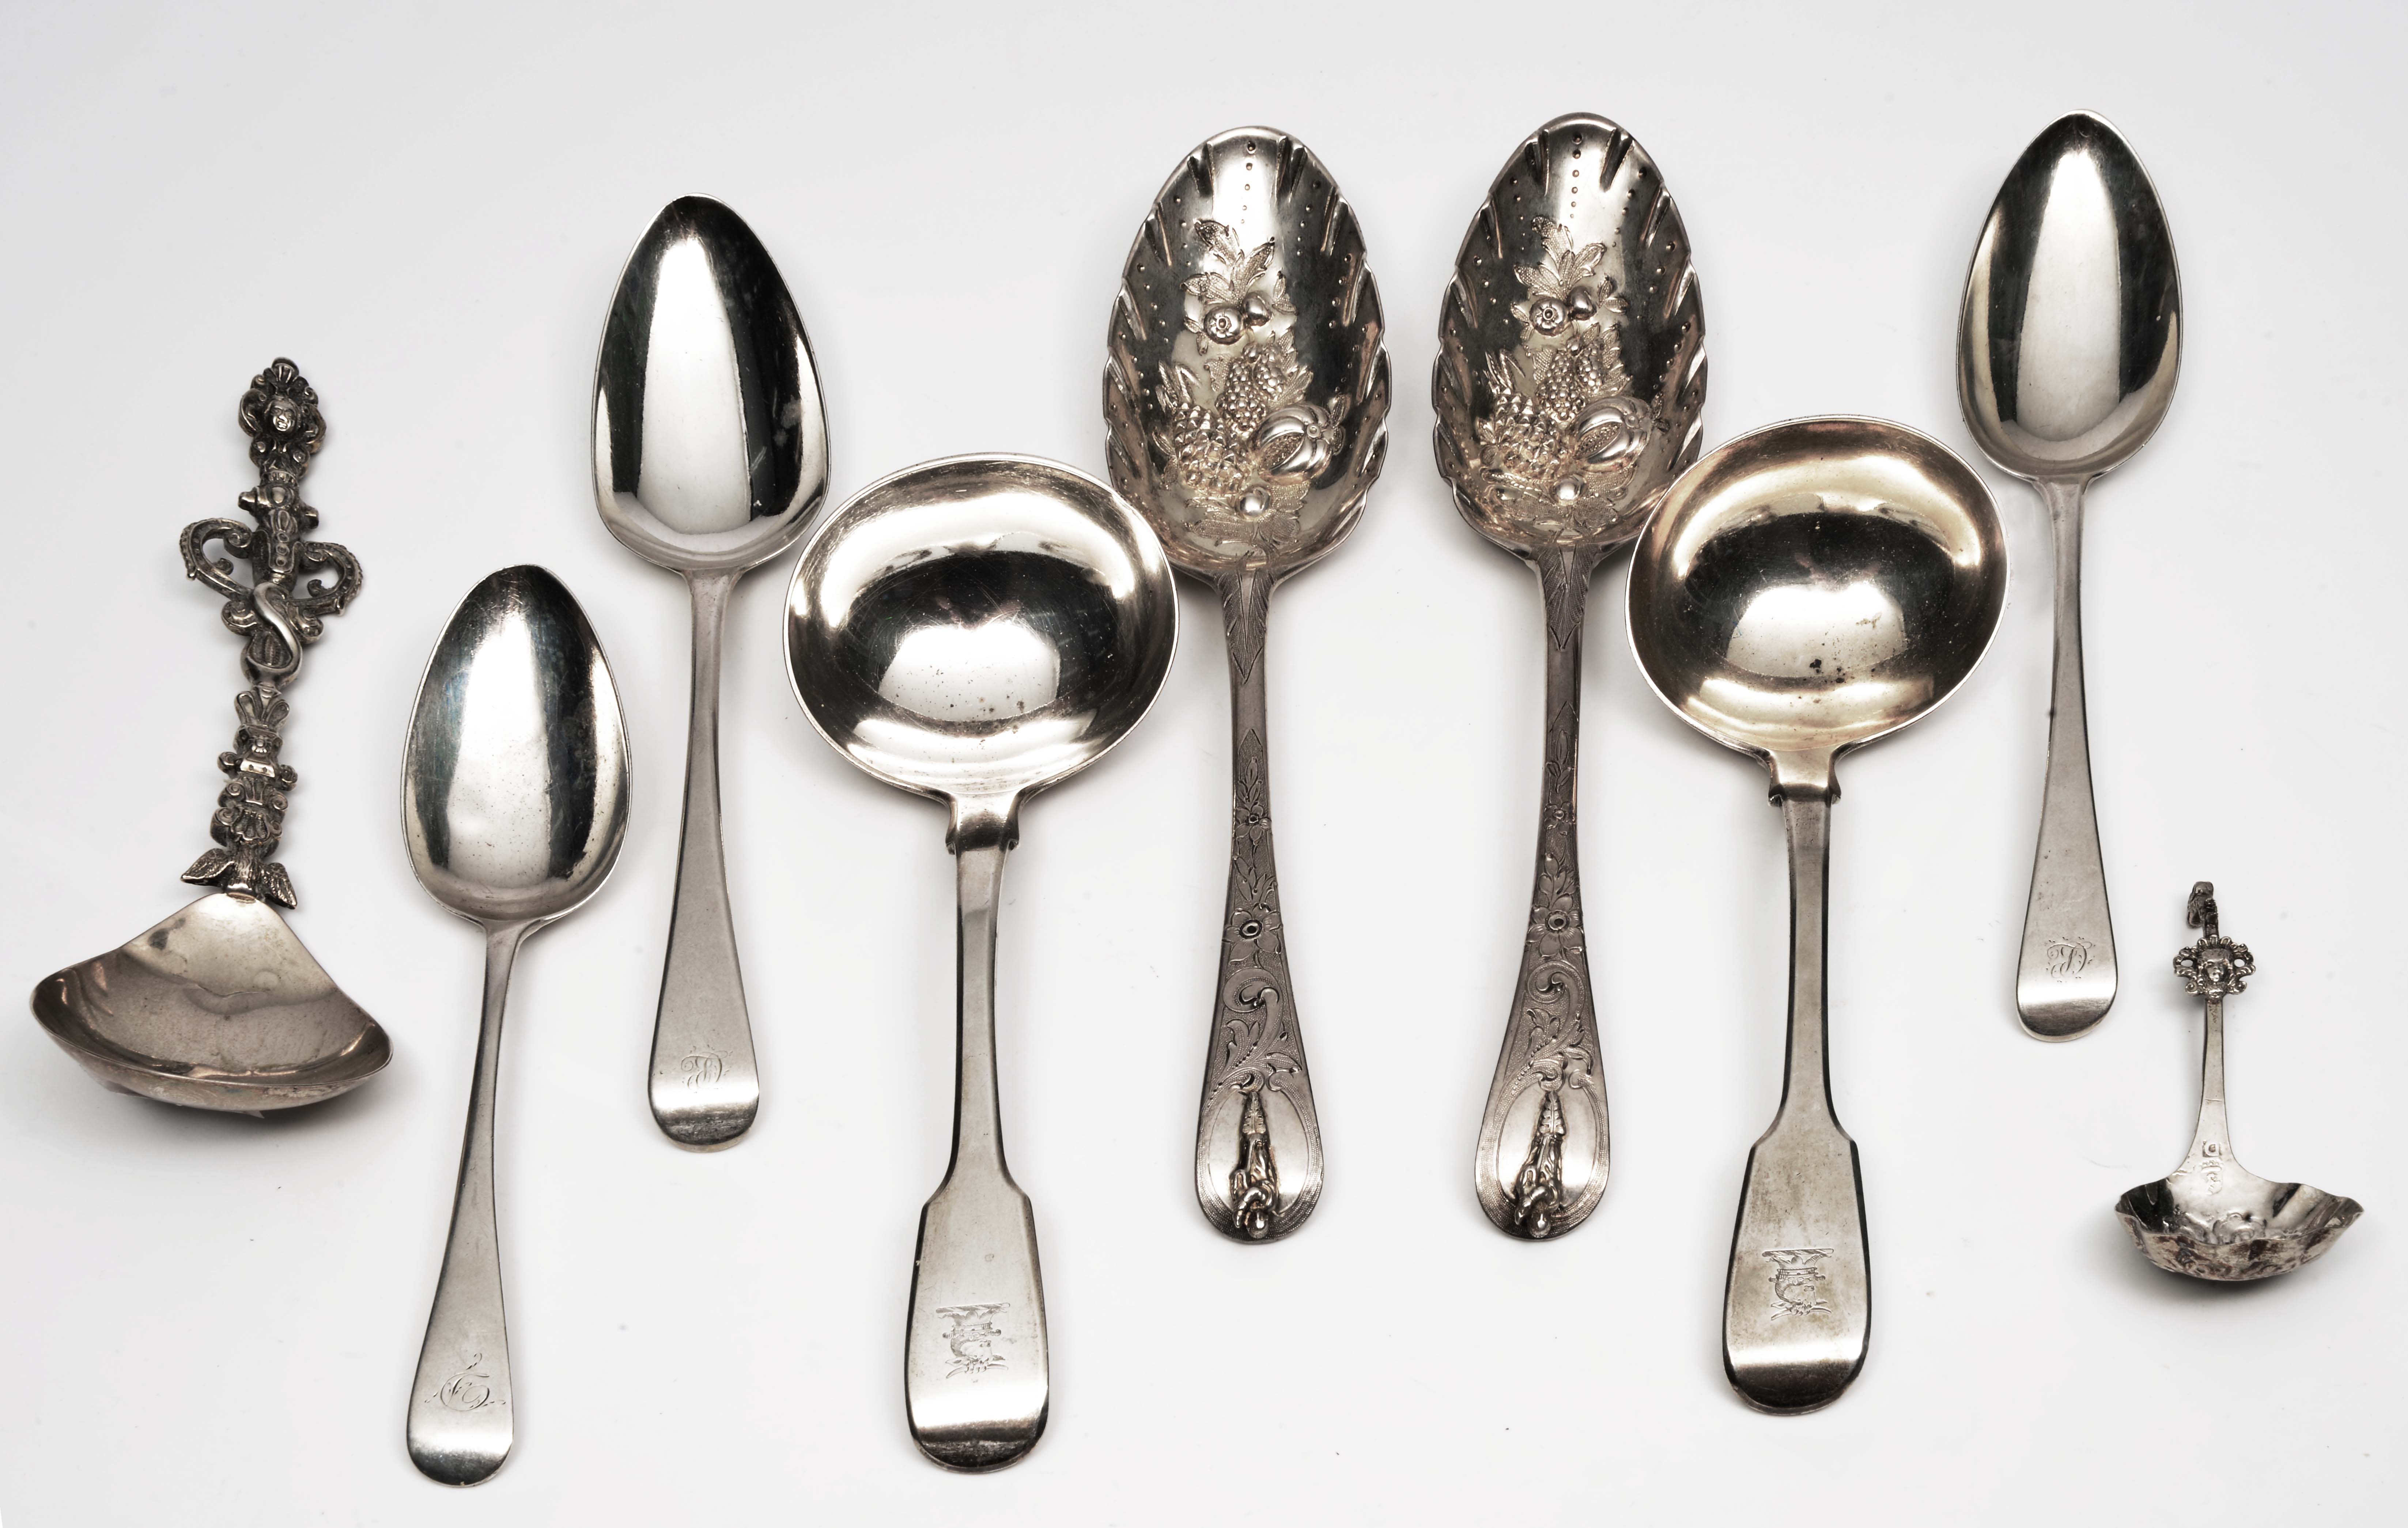 TWO 18TH CENTURY SILVER BERRY SPOONS, two silver sauce ladels, three Georgian dessert spoons, a